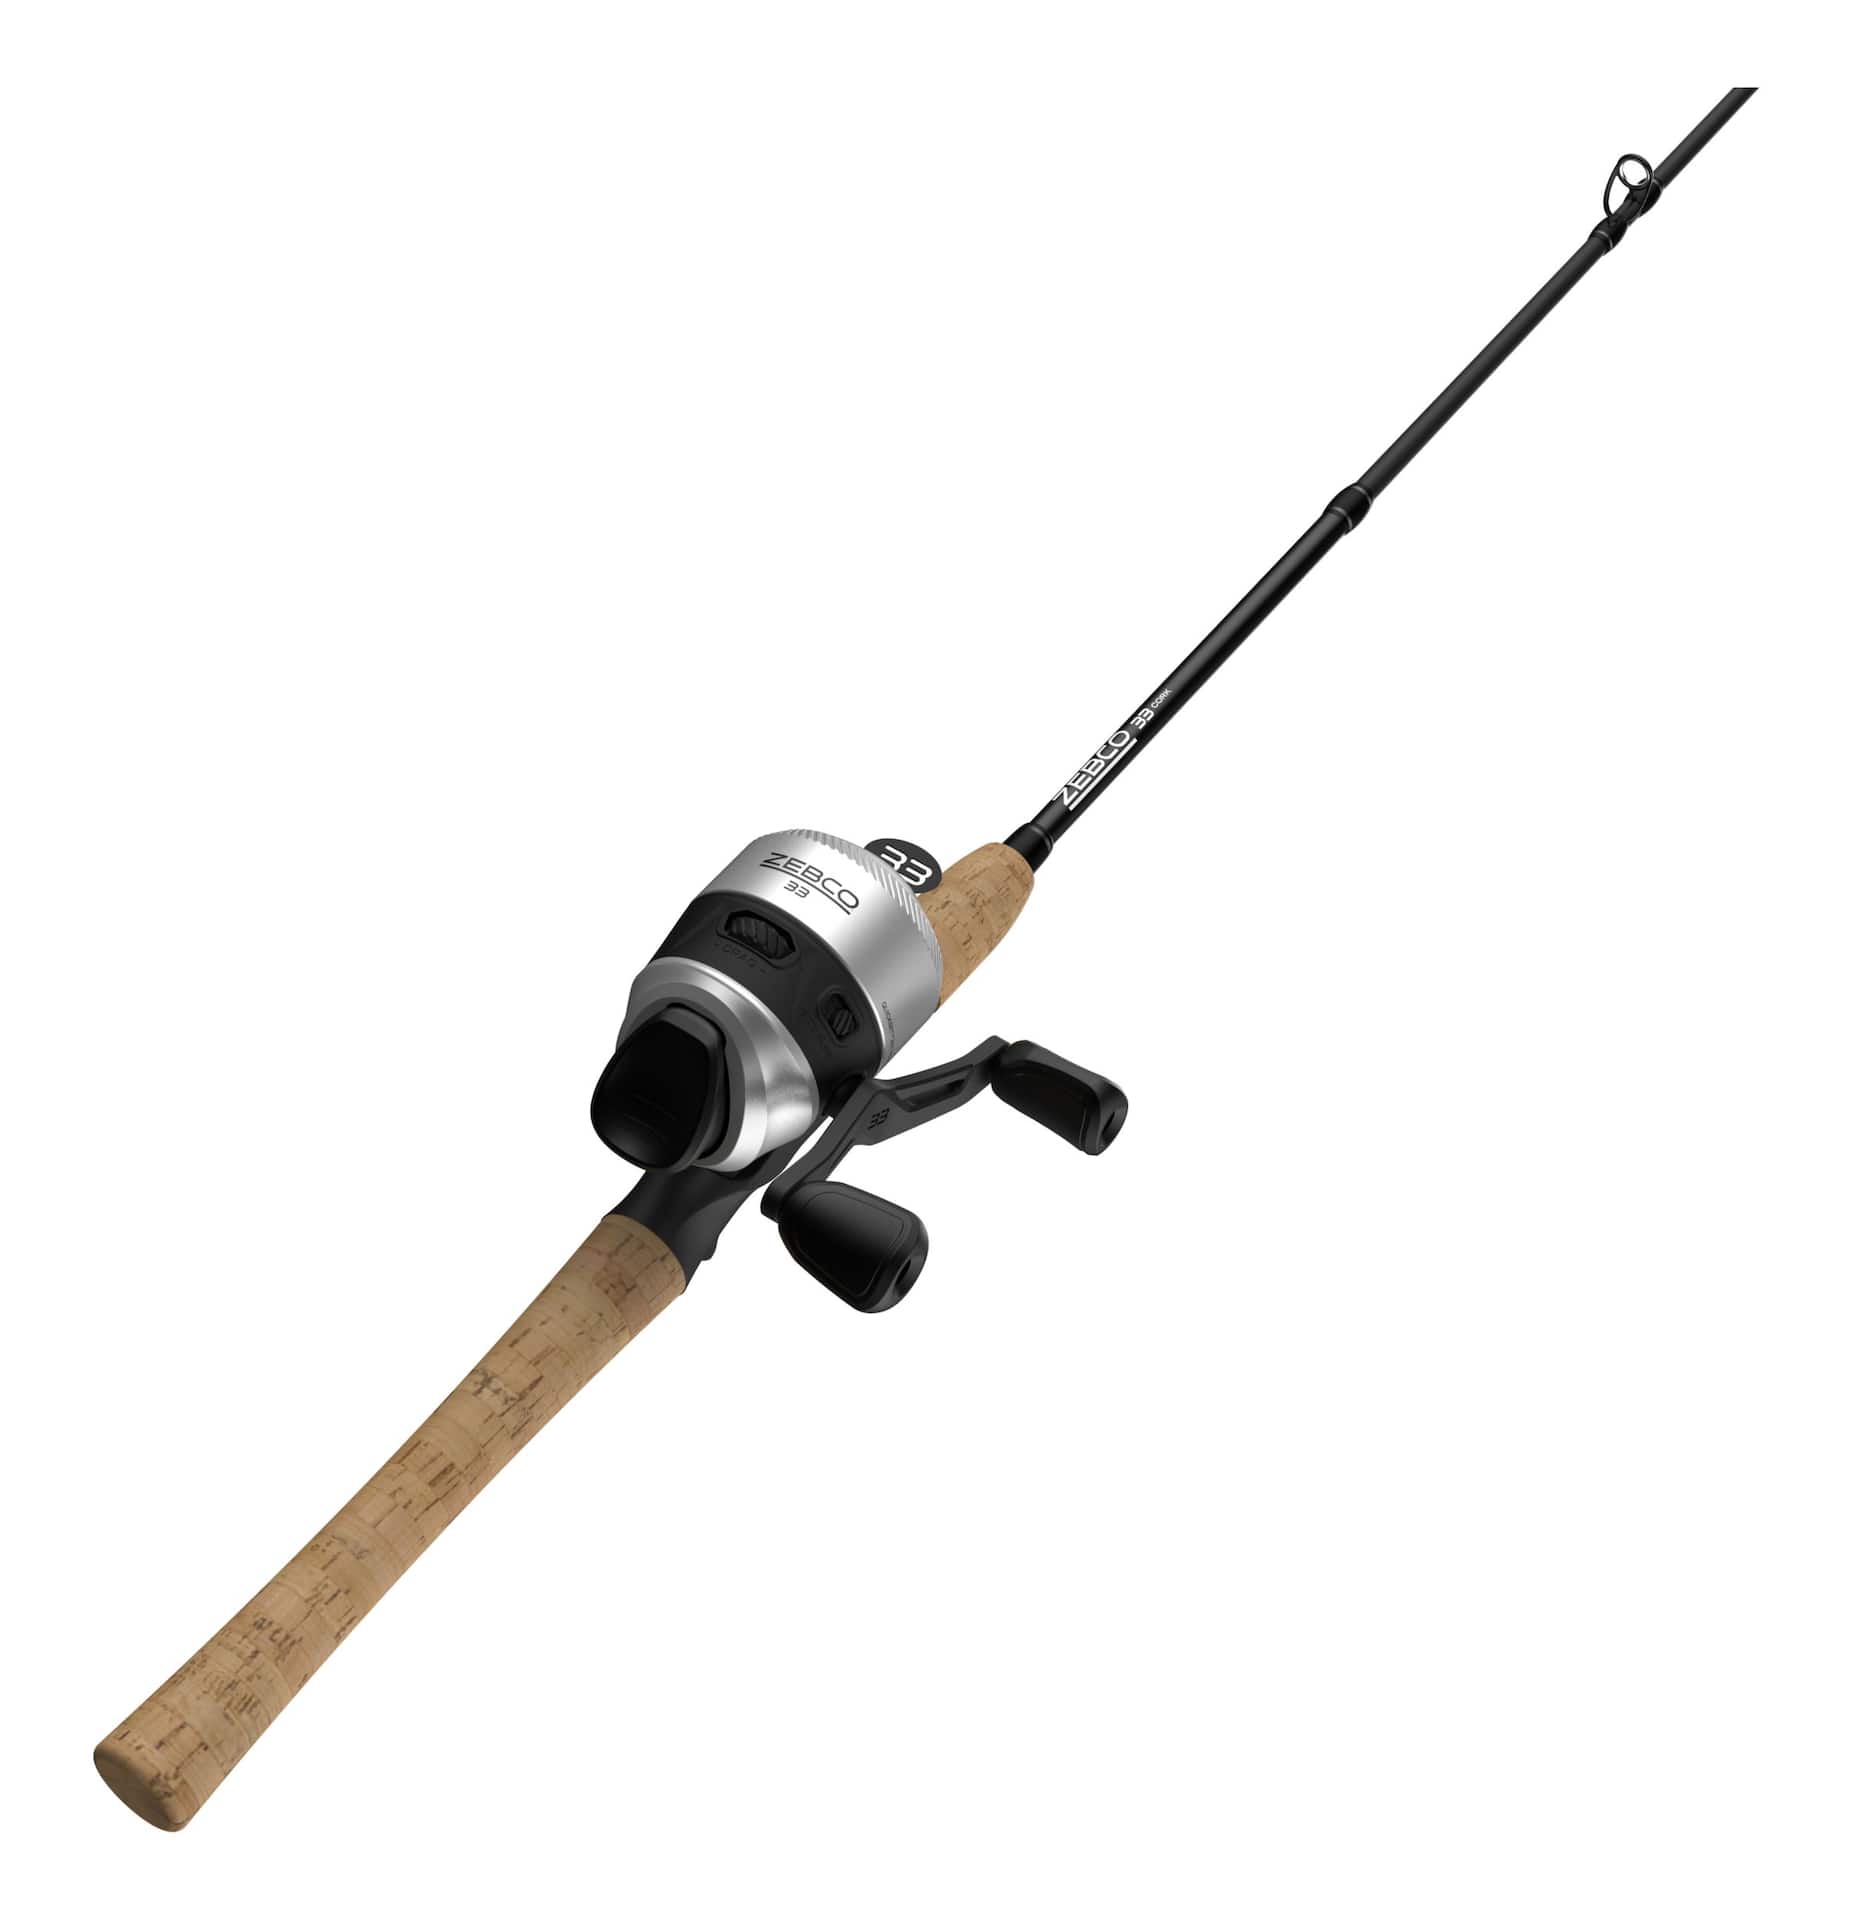  Zebco 33 Micro Spinning Reel and Telescopic Fishing Rod Combo,  Extendable 19-Inch to 5-Foot Telescopic Fishing Pole with ComfortGrip Rod  Handle, Quickset Anti-Reverse Fishing Reel, Silver/Black : Sports & Outdoors